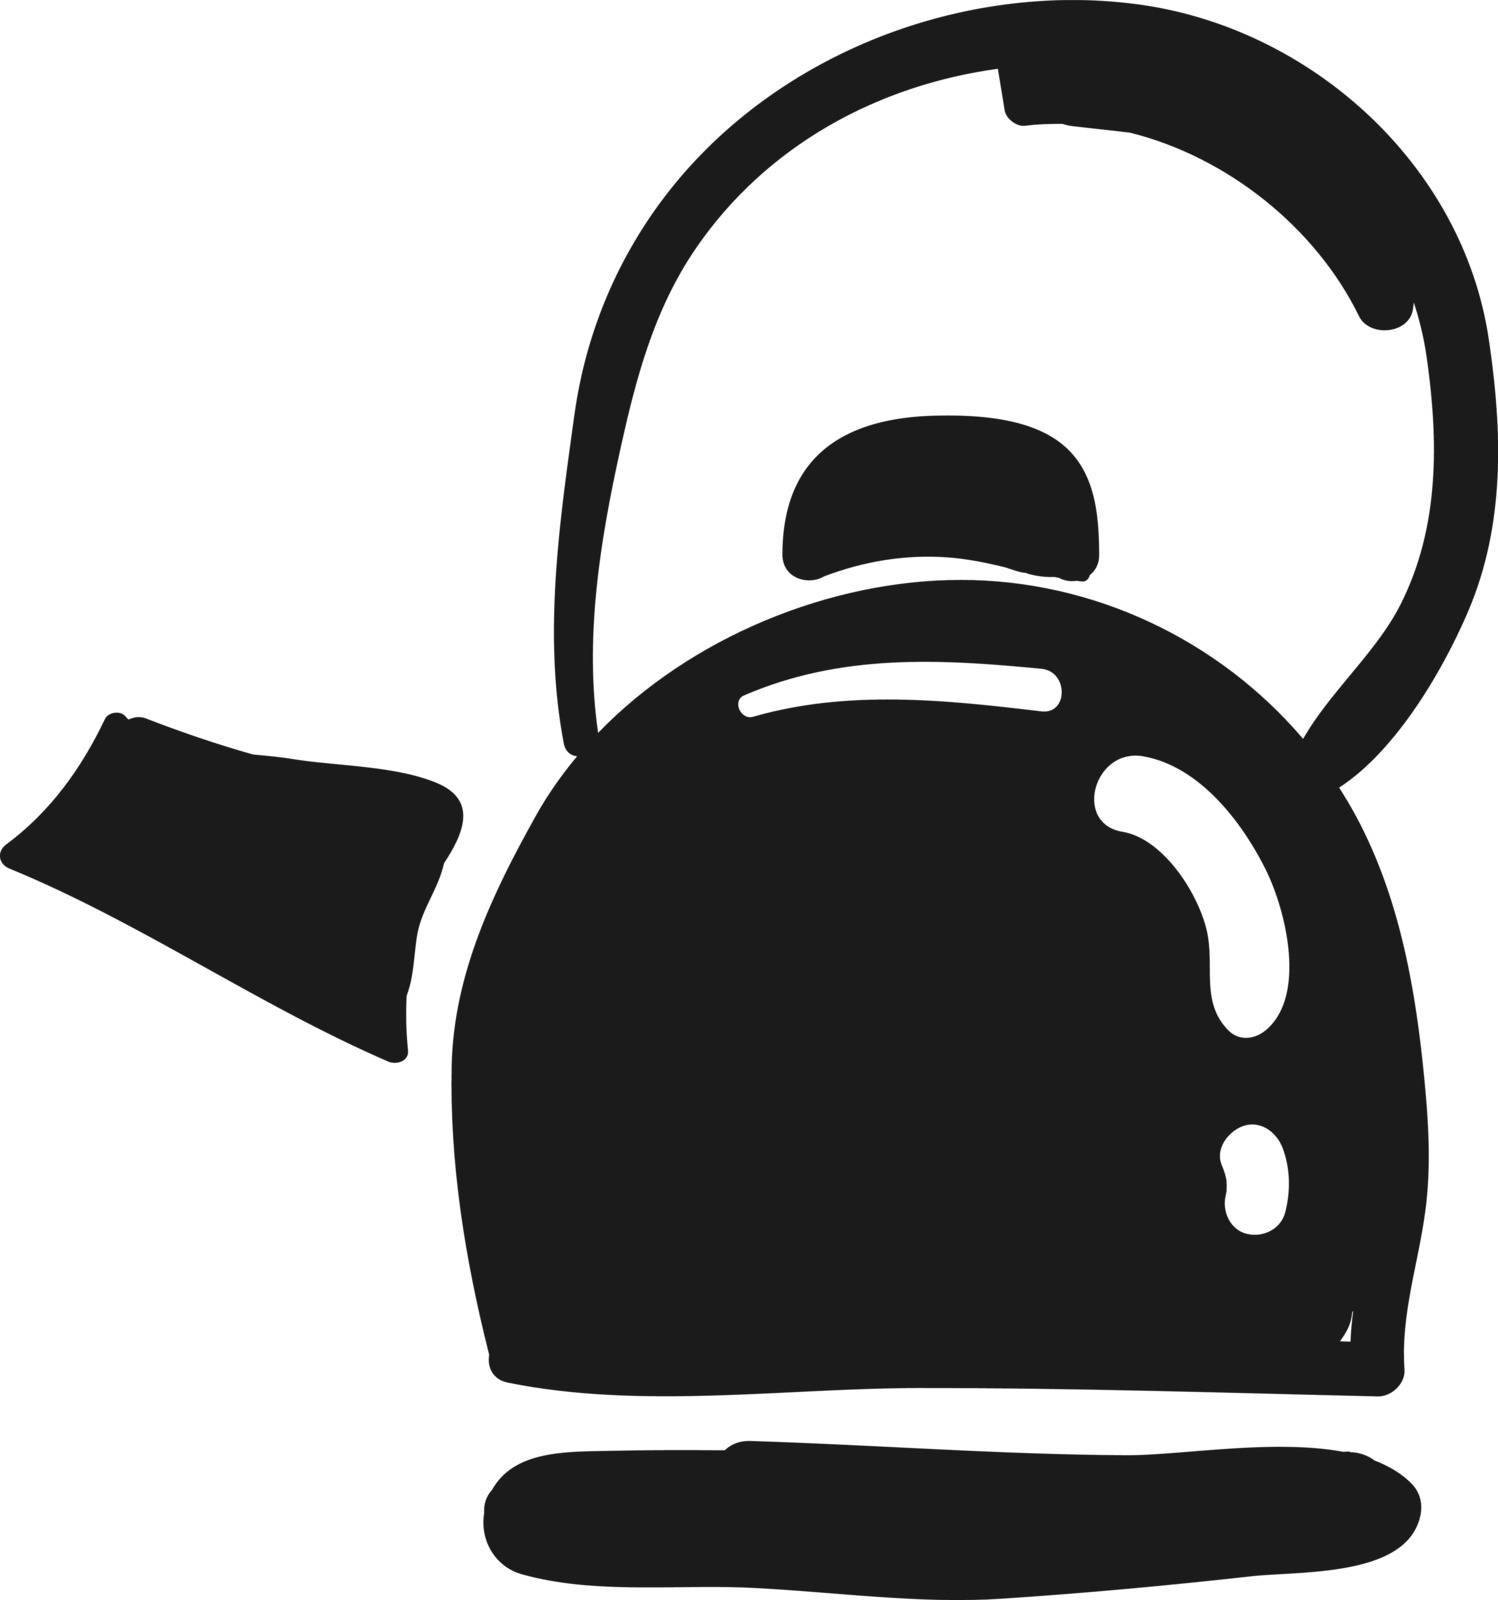 Clipart of a black-colored teapot designed with a white exclamation mark has a small spout  lid  and a handle to make it portable  vector  color drawing or illustration